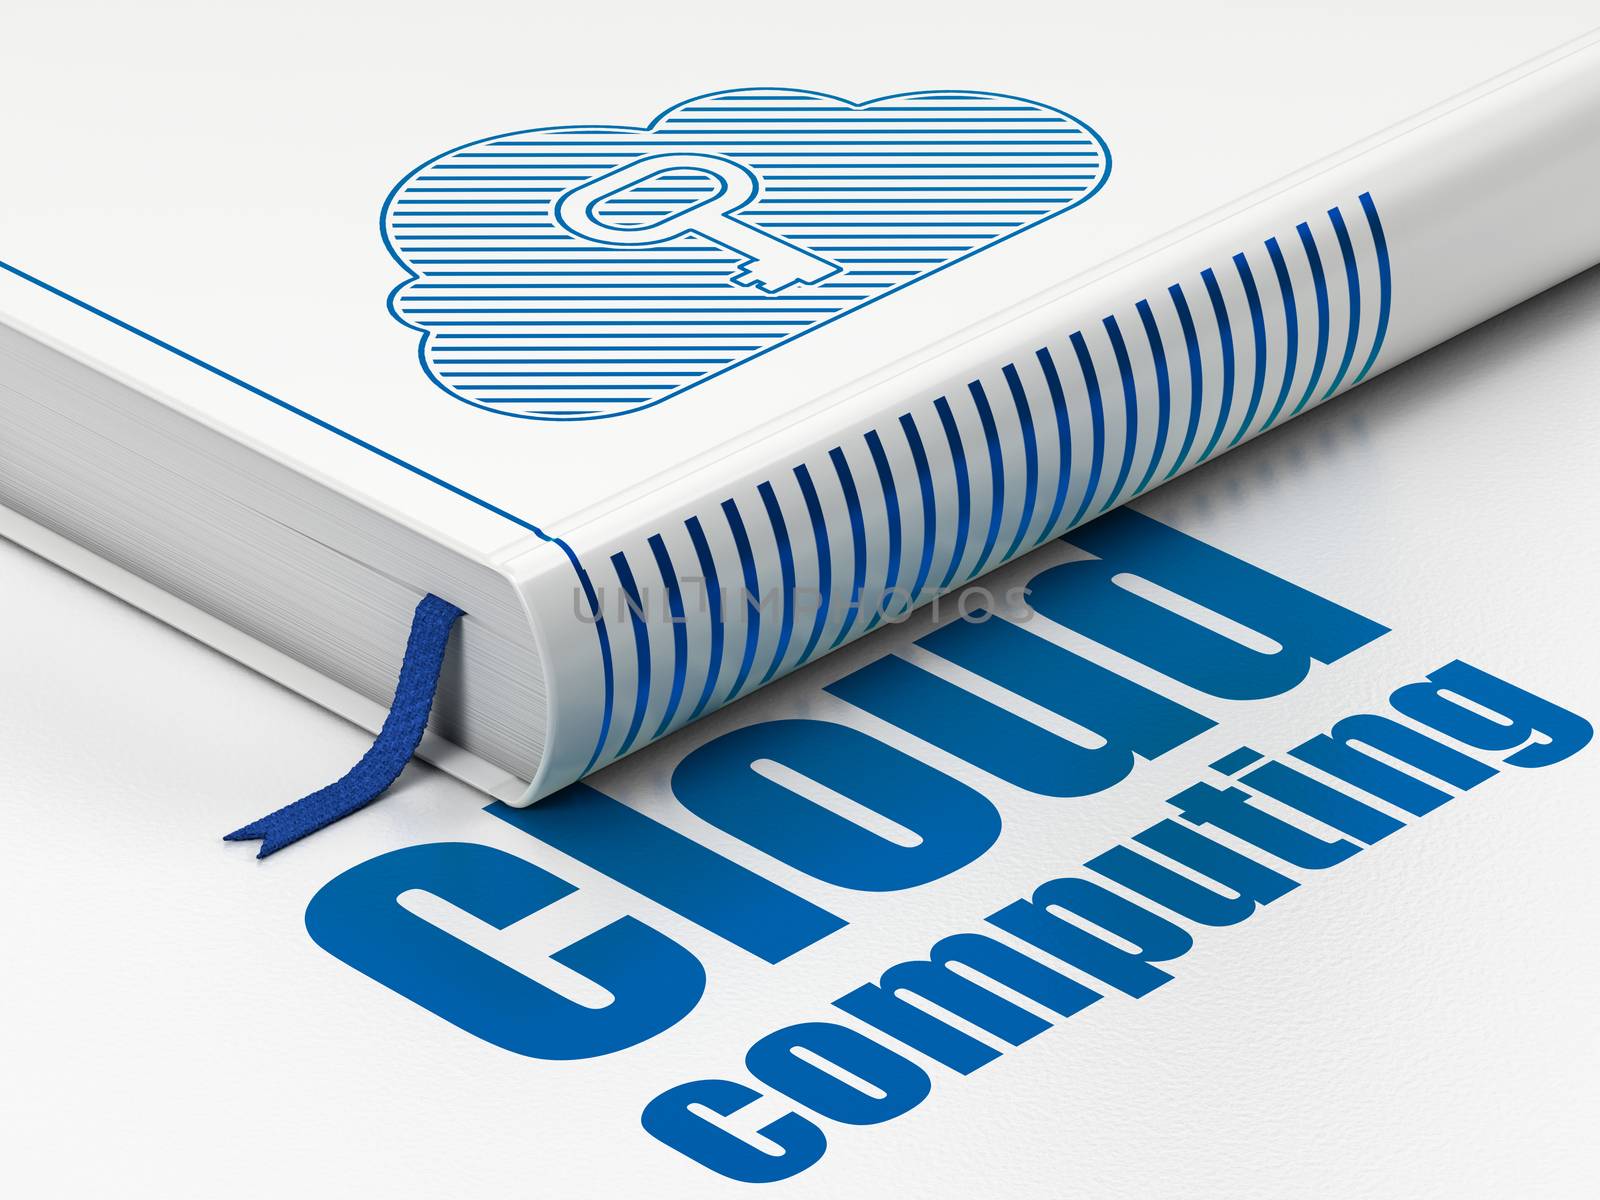 Cloud technology concept: closed book with Blue Cloud With Key icon and text Cloud Computing on floor, white background, 3D rendering